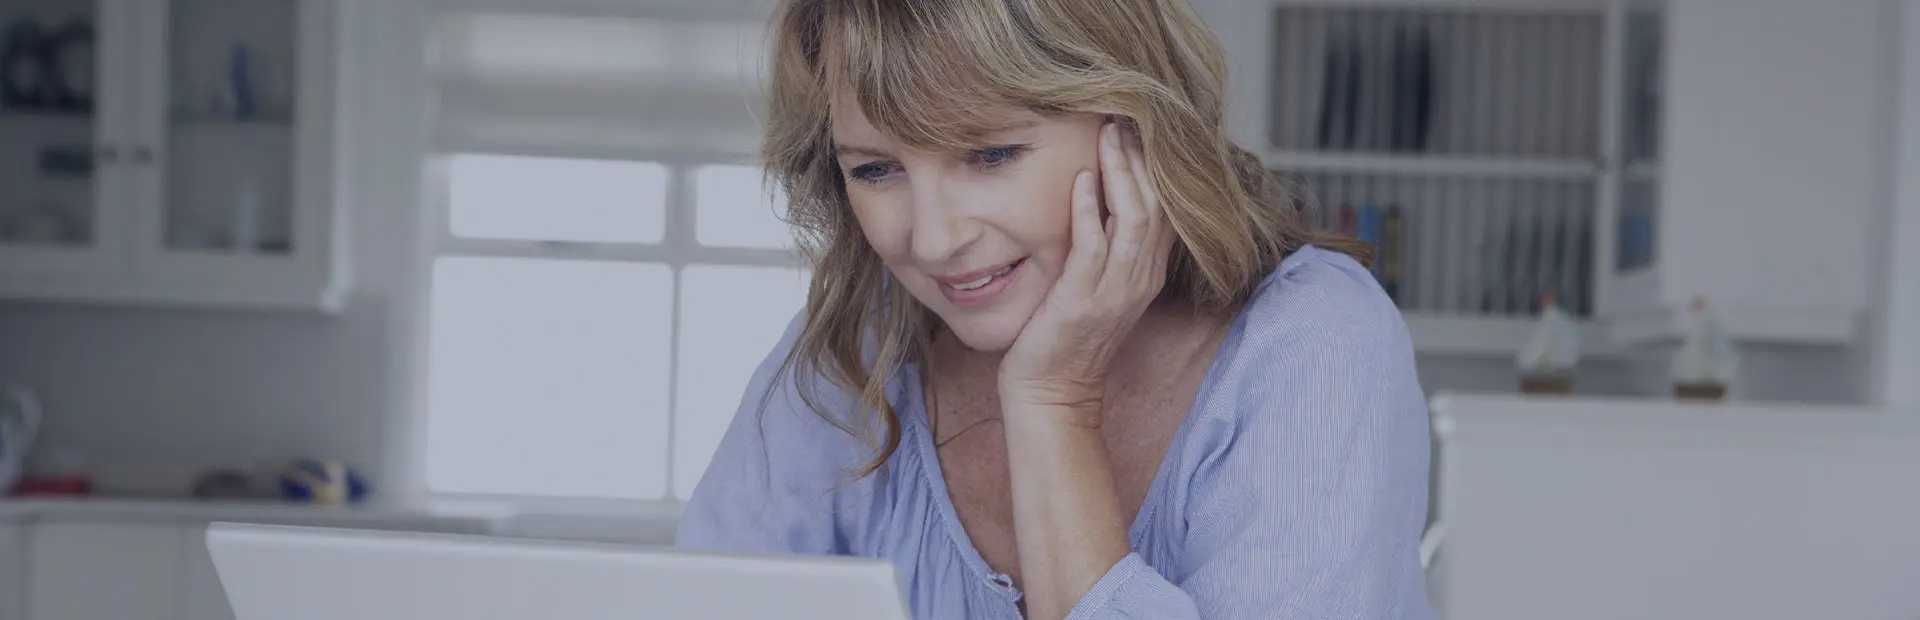 A blonde woman in her 50s wearing a blue shirt is sitting in a white kitchen researching denture stomatitis on her laptop.